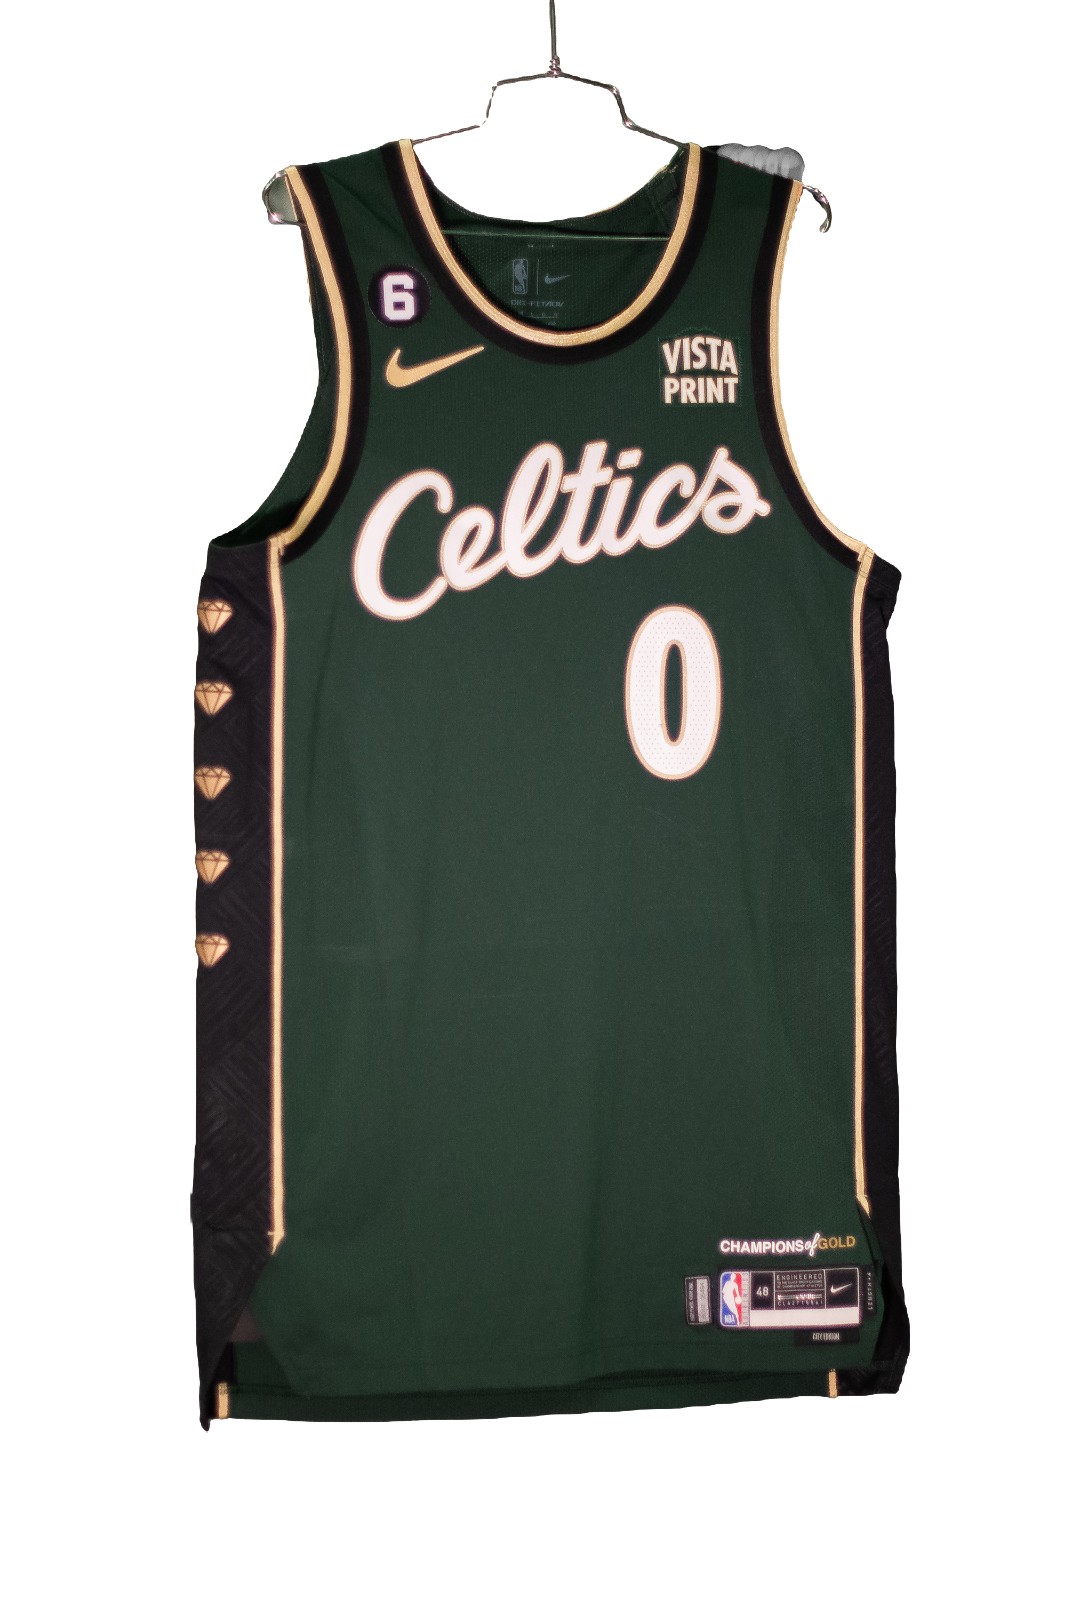 Boston Celtics on X: Our 2022-2023 City Edition Jersey pays homage to the  indelible impact Bill Russell left on the game ☘️ Sign up to be notified  when this year's City Edition